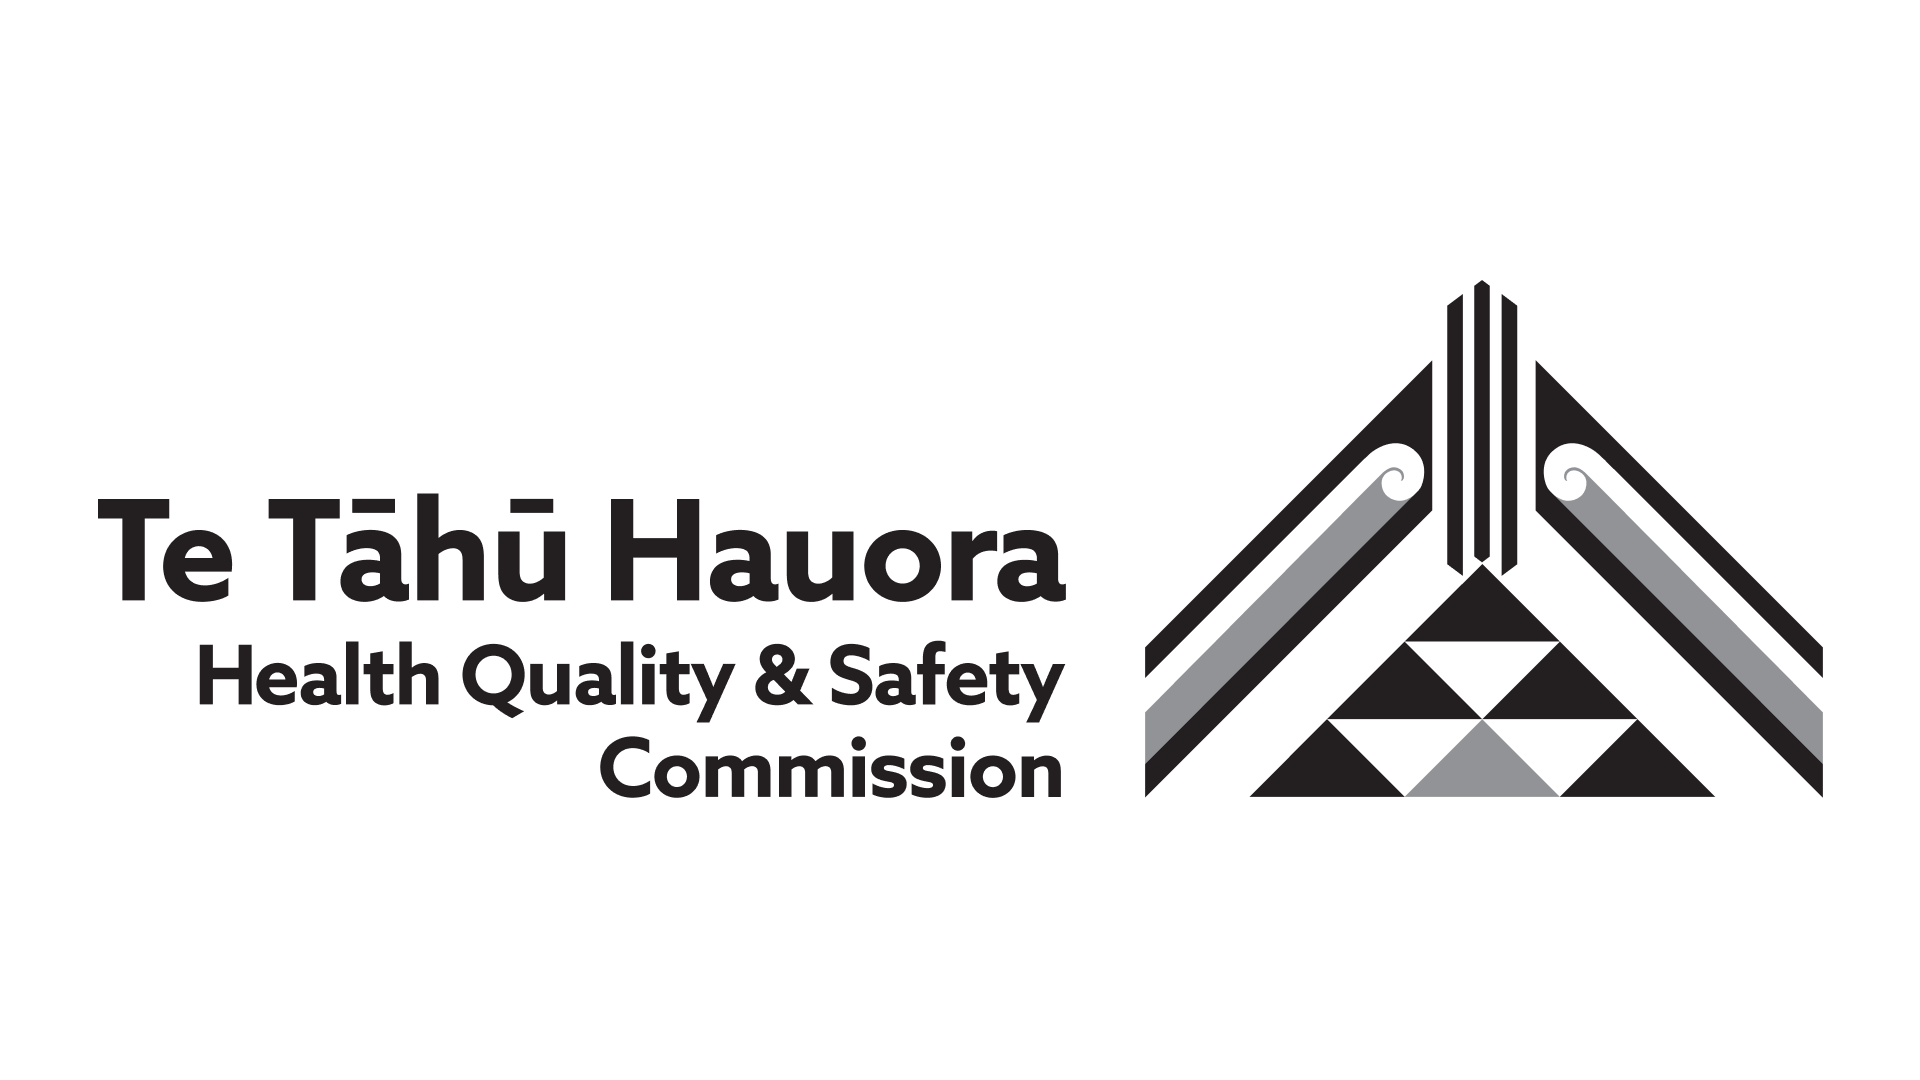 Learn about infant sleep product safety – Te Hāhū Hauora, Health Qaulity & Safety Commission logo